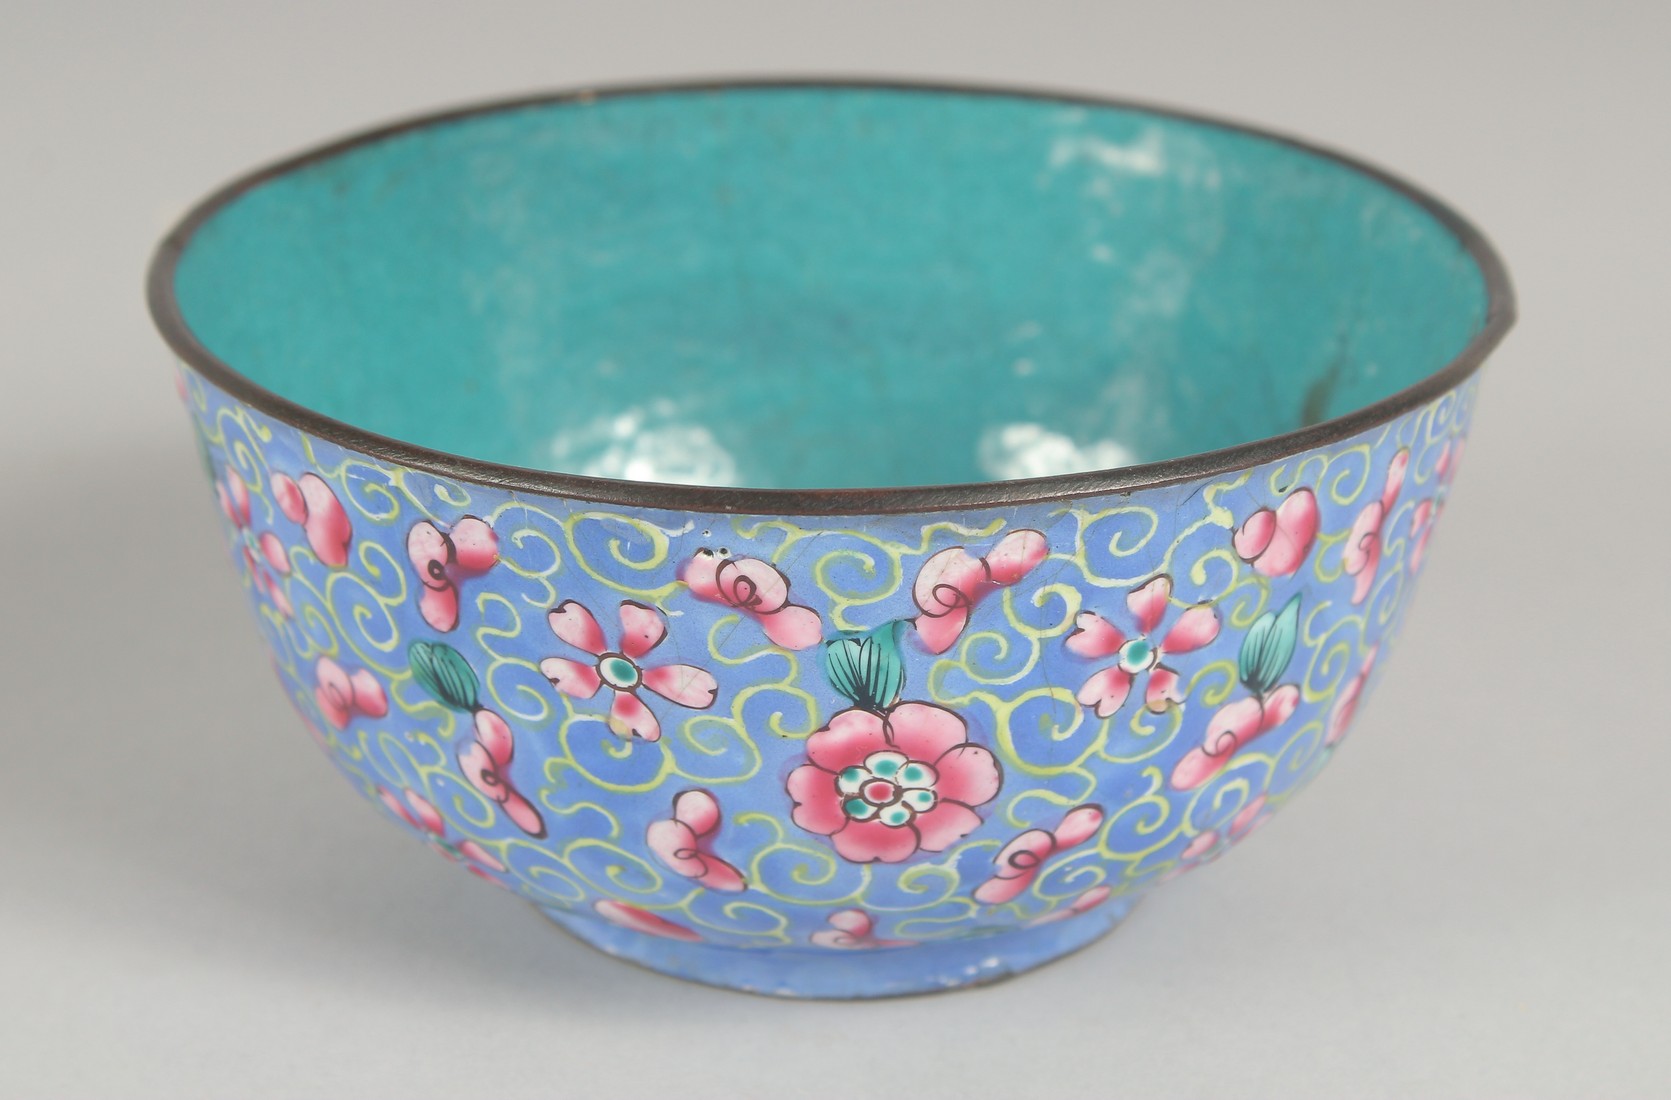 A CHINESE CANTON FAMILLE ROSE ENAMEL BOWL, the exterior with foliate decoration, 11.5cm diameter.